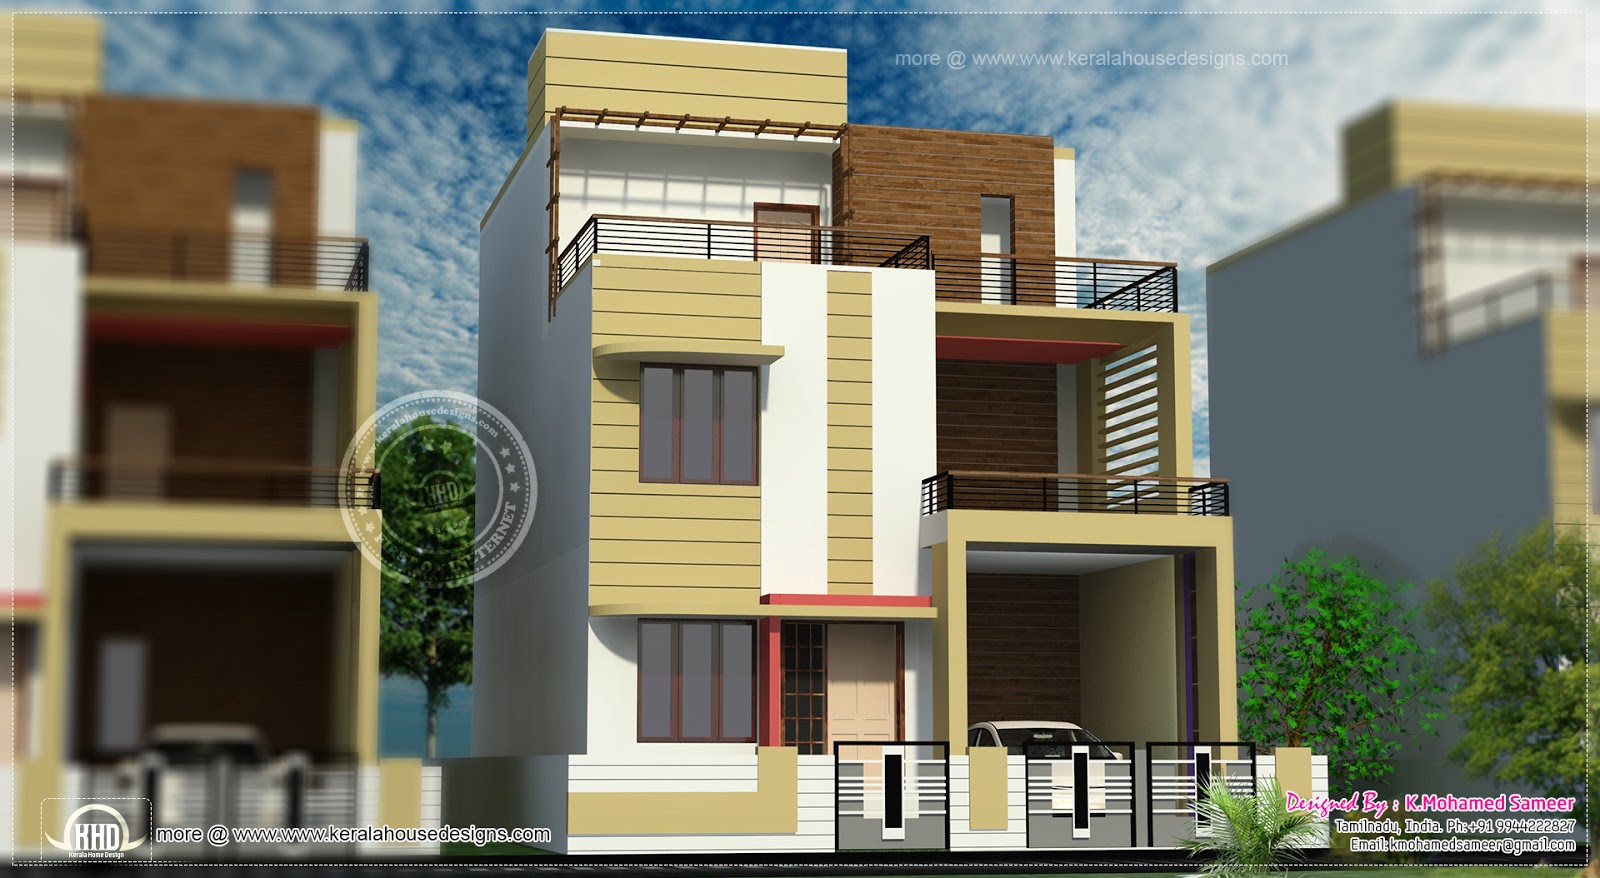  3  story  house  plan  design in 2626 sq feet Home  Kerala Plans 